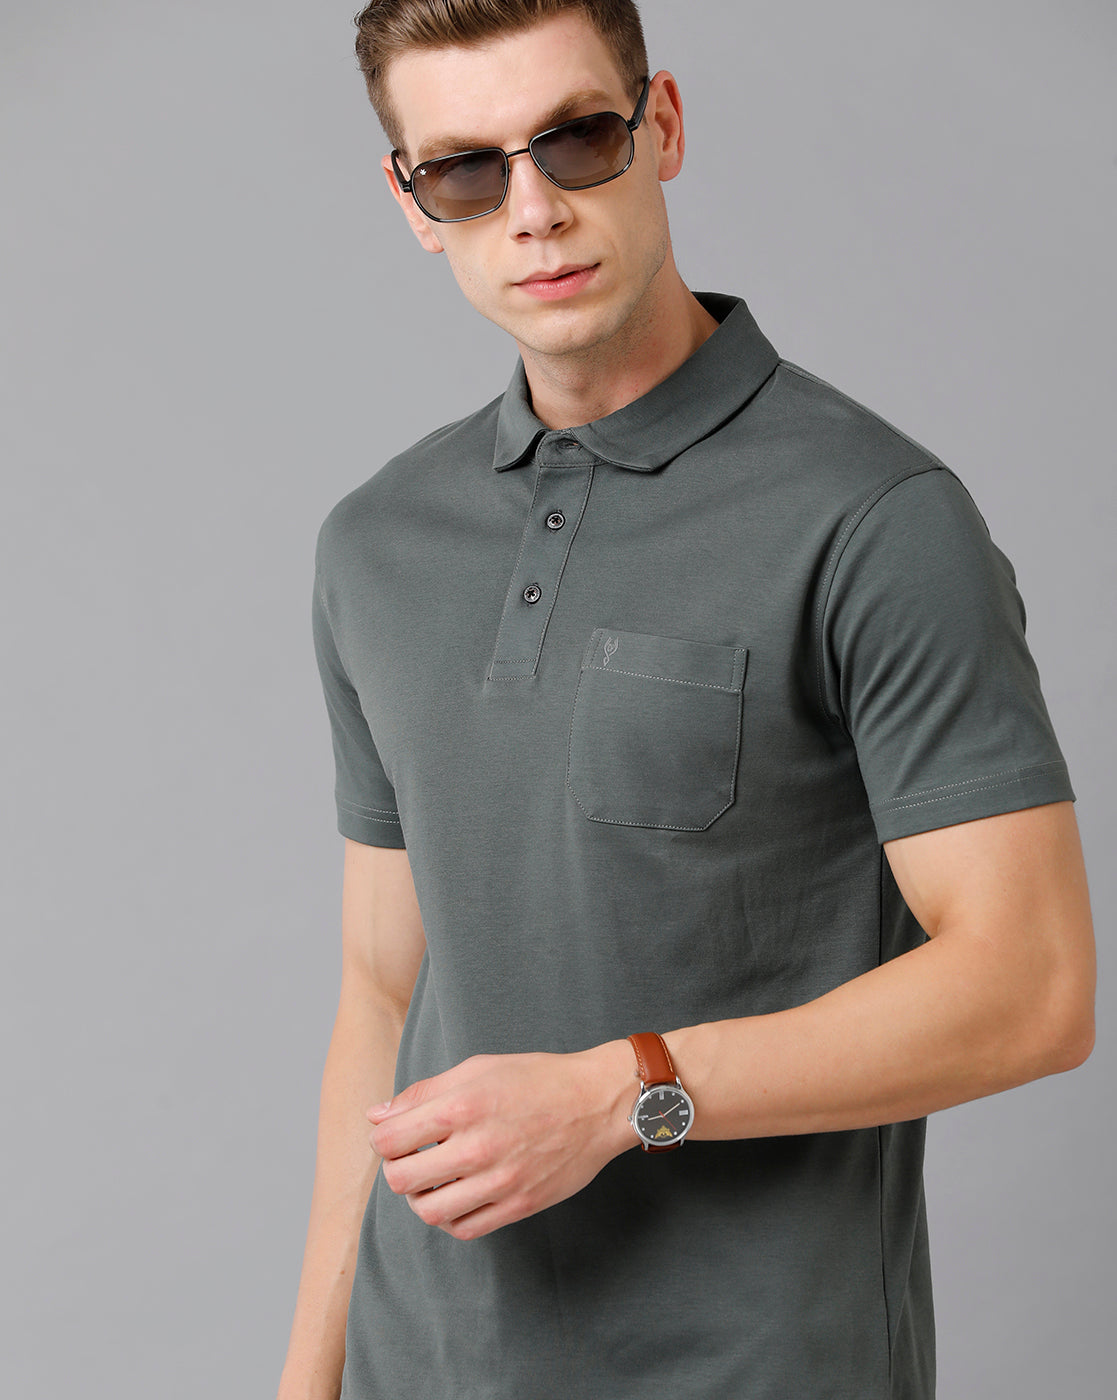 Classic Polo Men's Cotton Solid Half Sleeve Slim Fit Polo Neck Green Color T-Shirt | HS-UNICO - 02 A